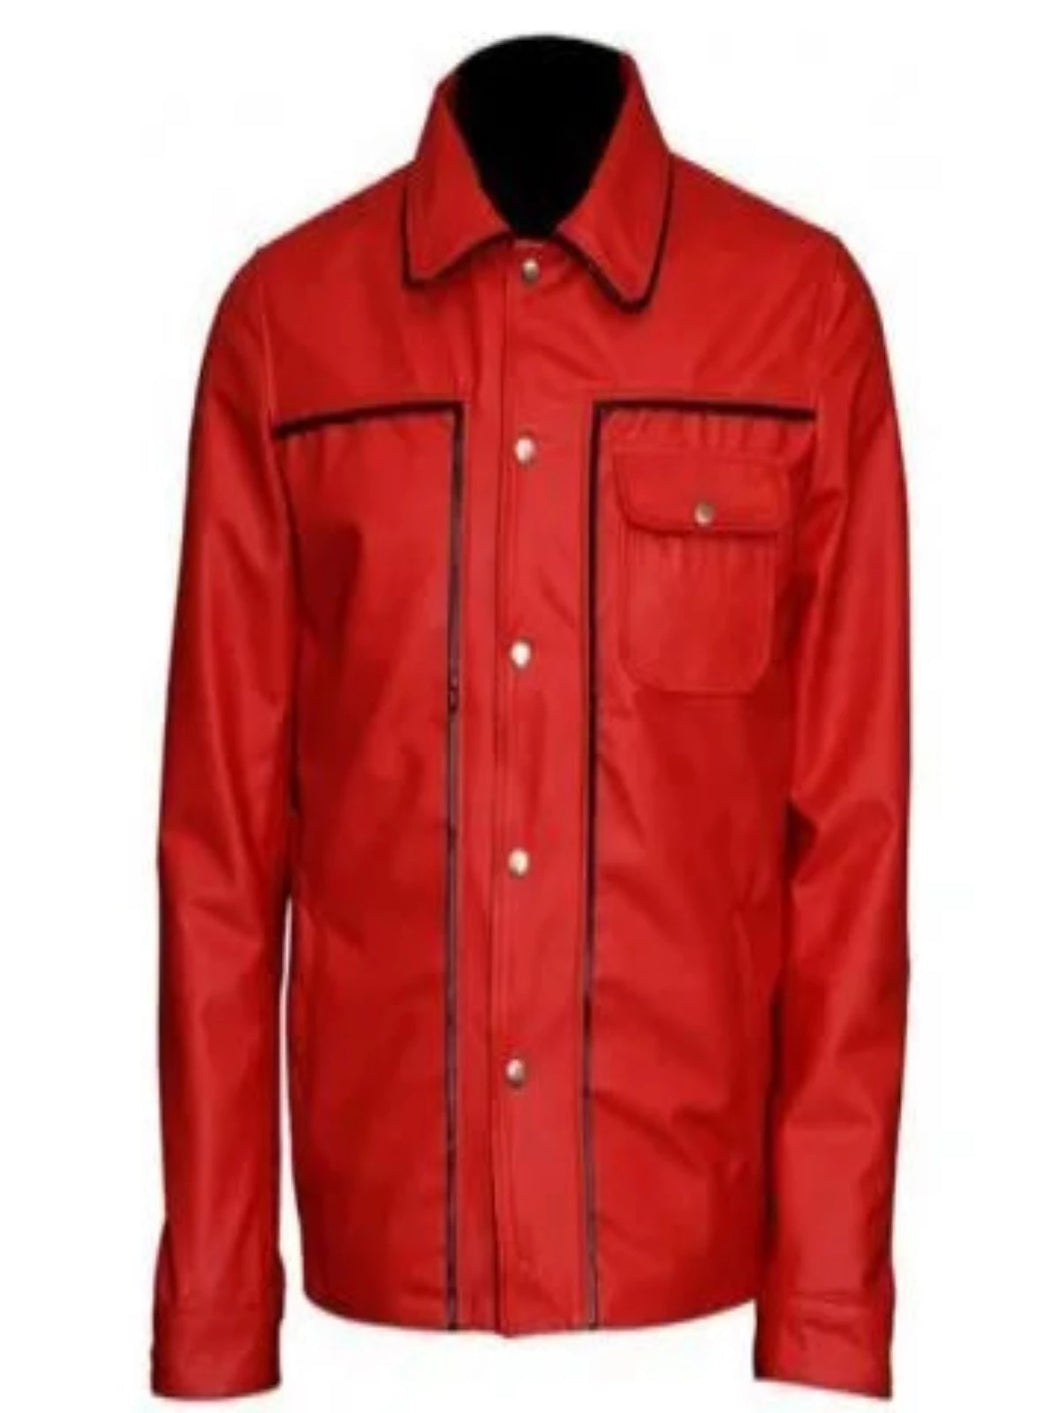 Mens New Fashion Real Red Leather Shirt